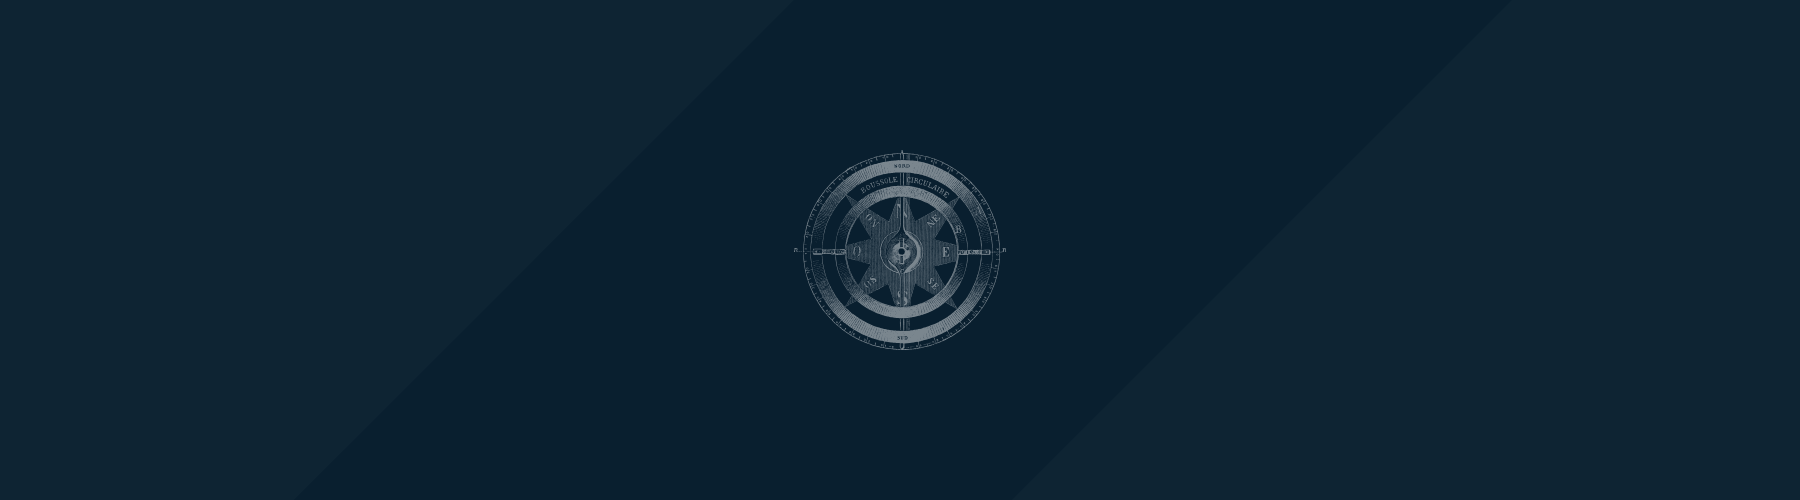 Dark blue background with a compass image overlaying a single stripe